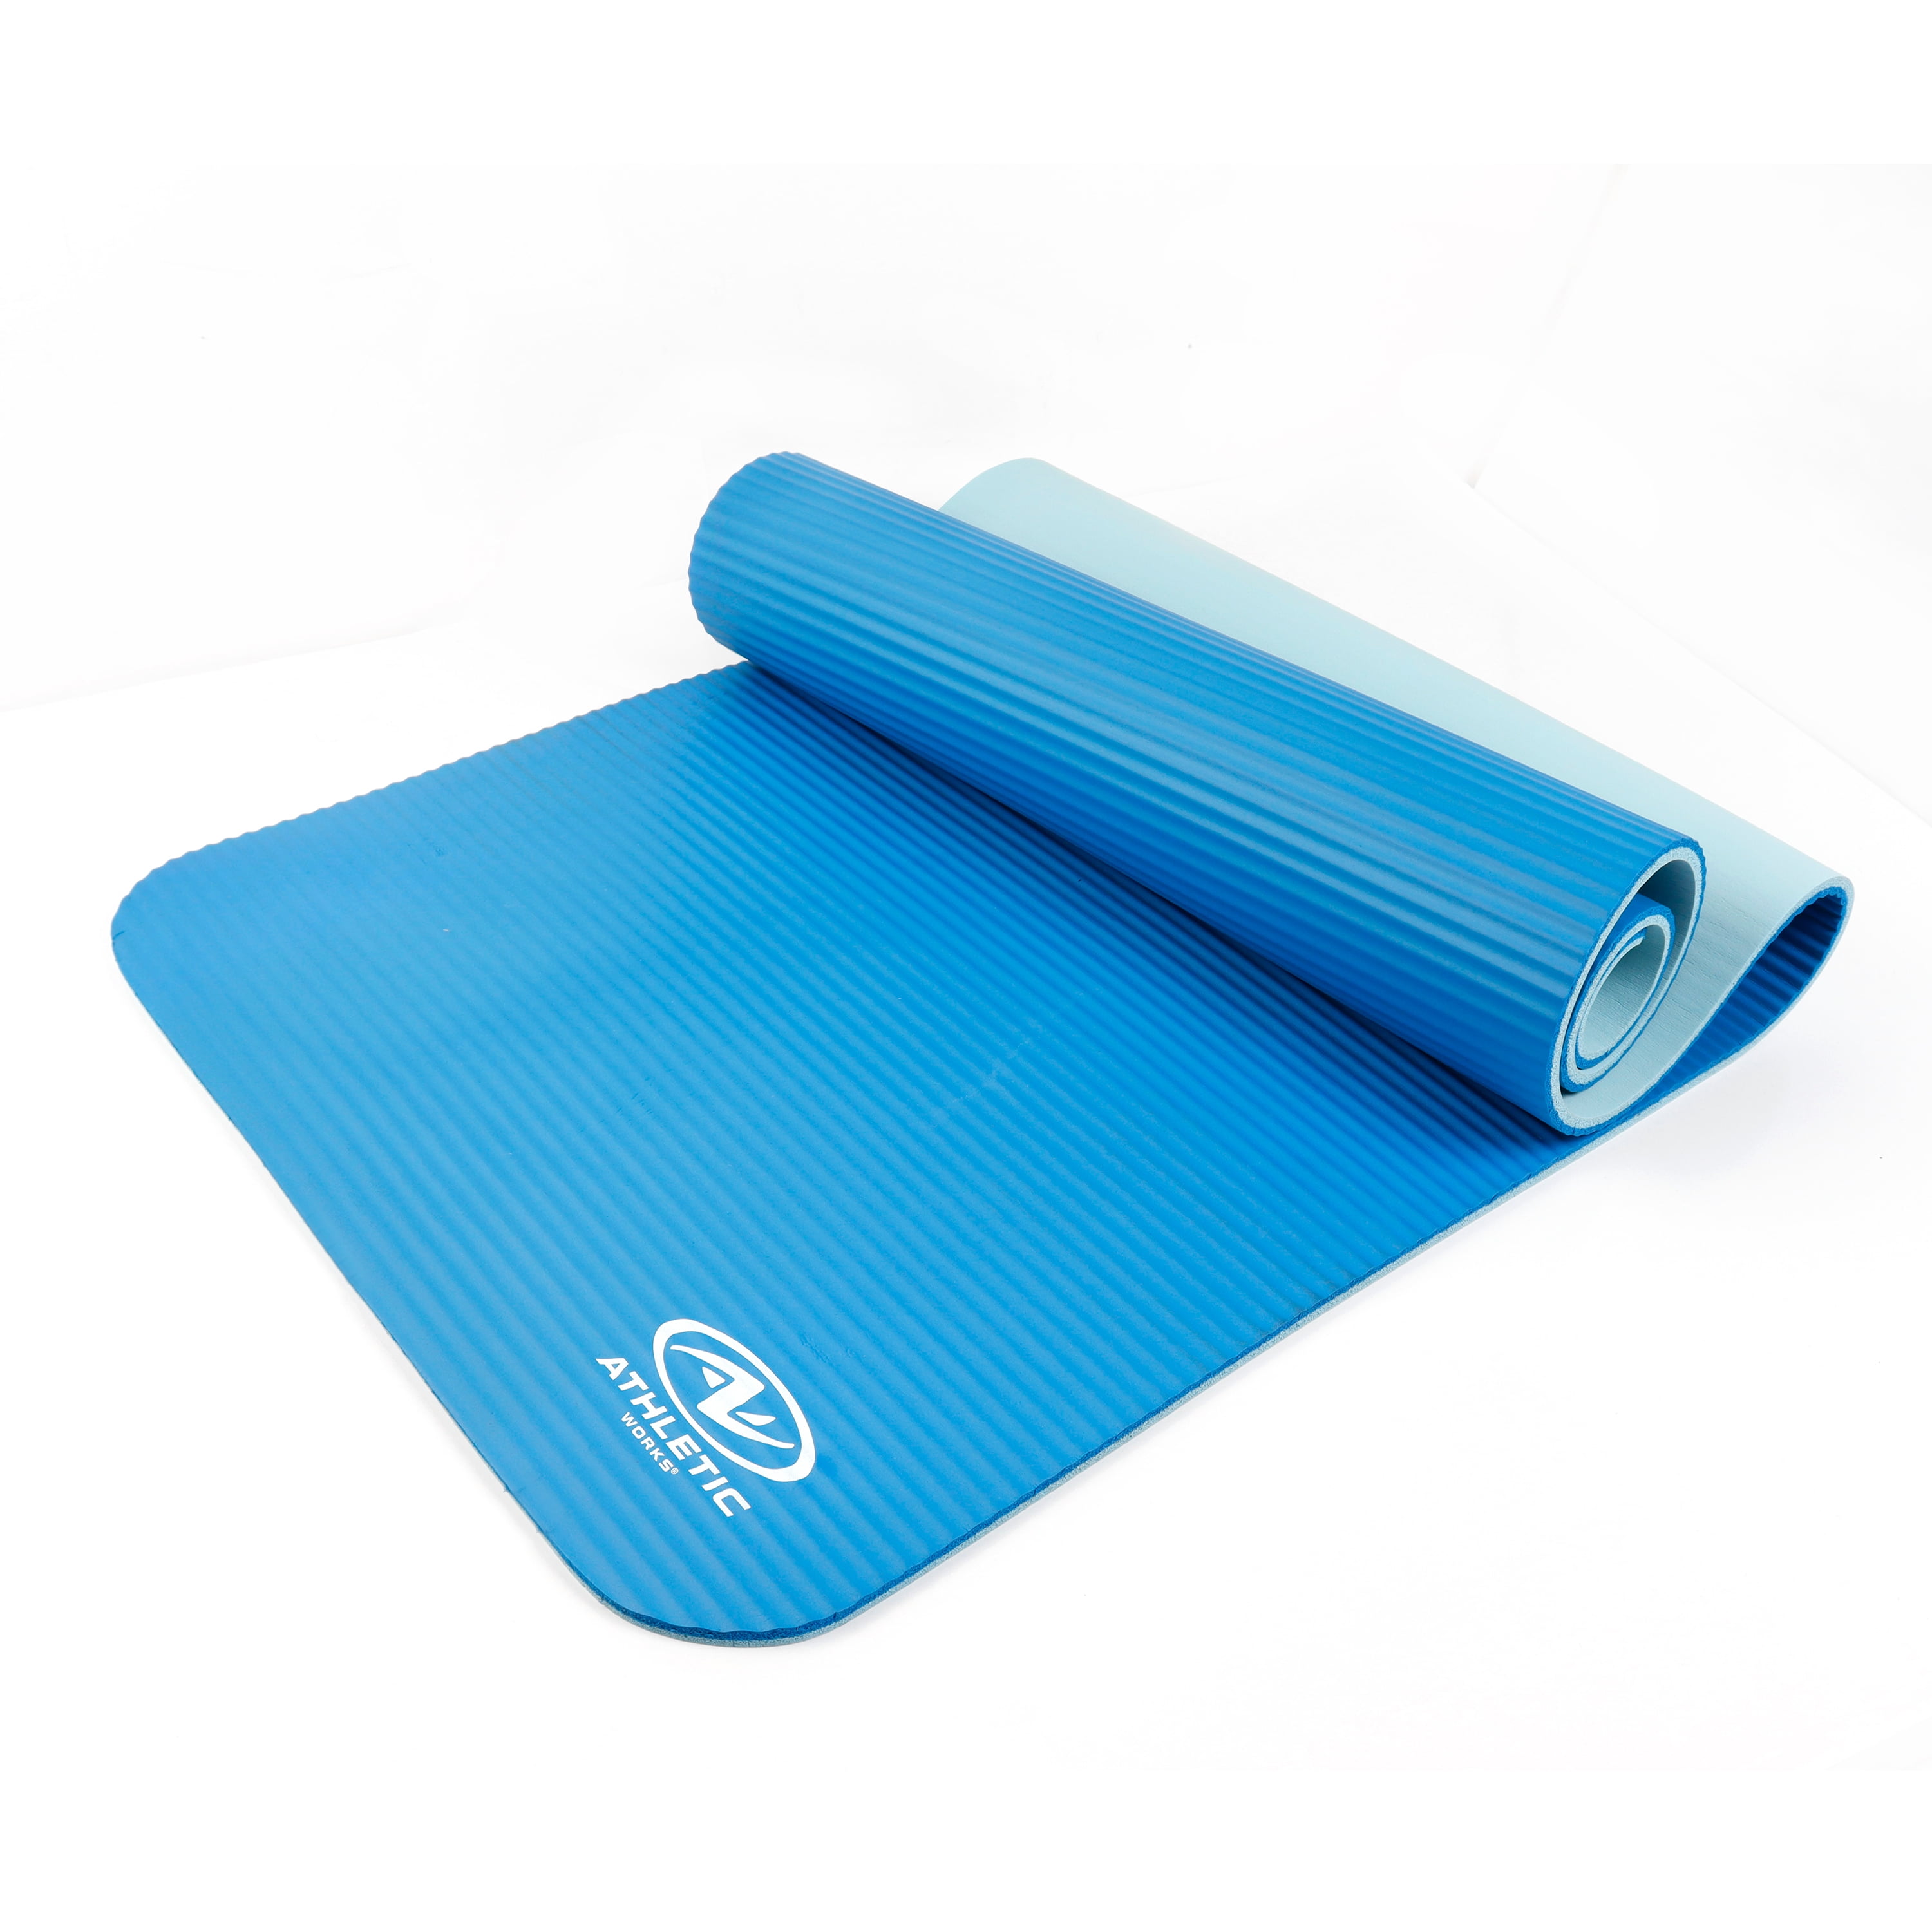 Balance Foam Yoga Pad Thick Durable Non-slip Exercise Fitness Pad Mat LoseWeight 